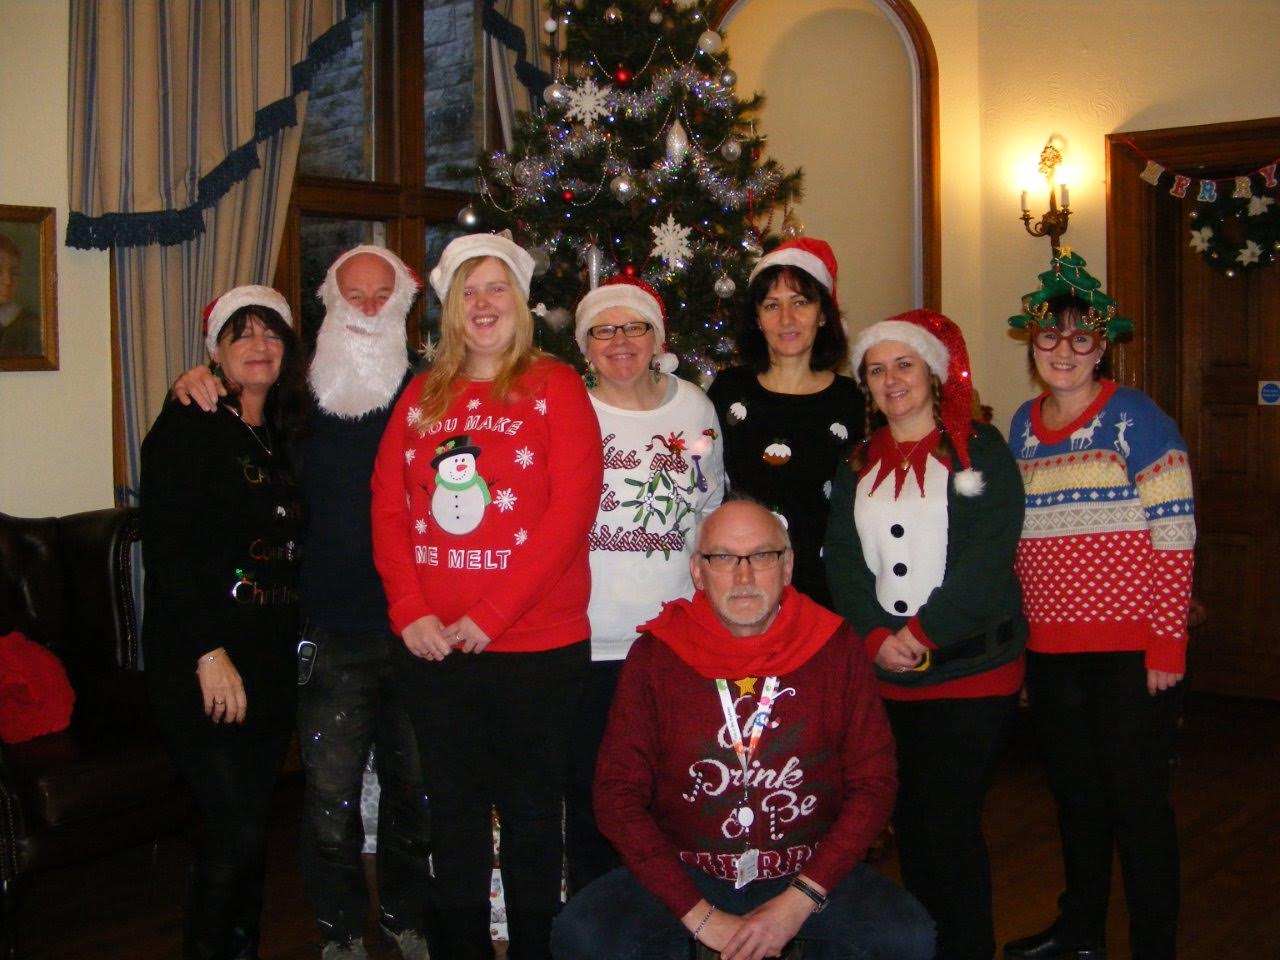 Christmas Jumpers raise money for charity